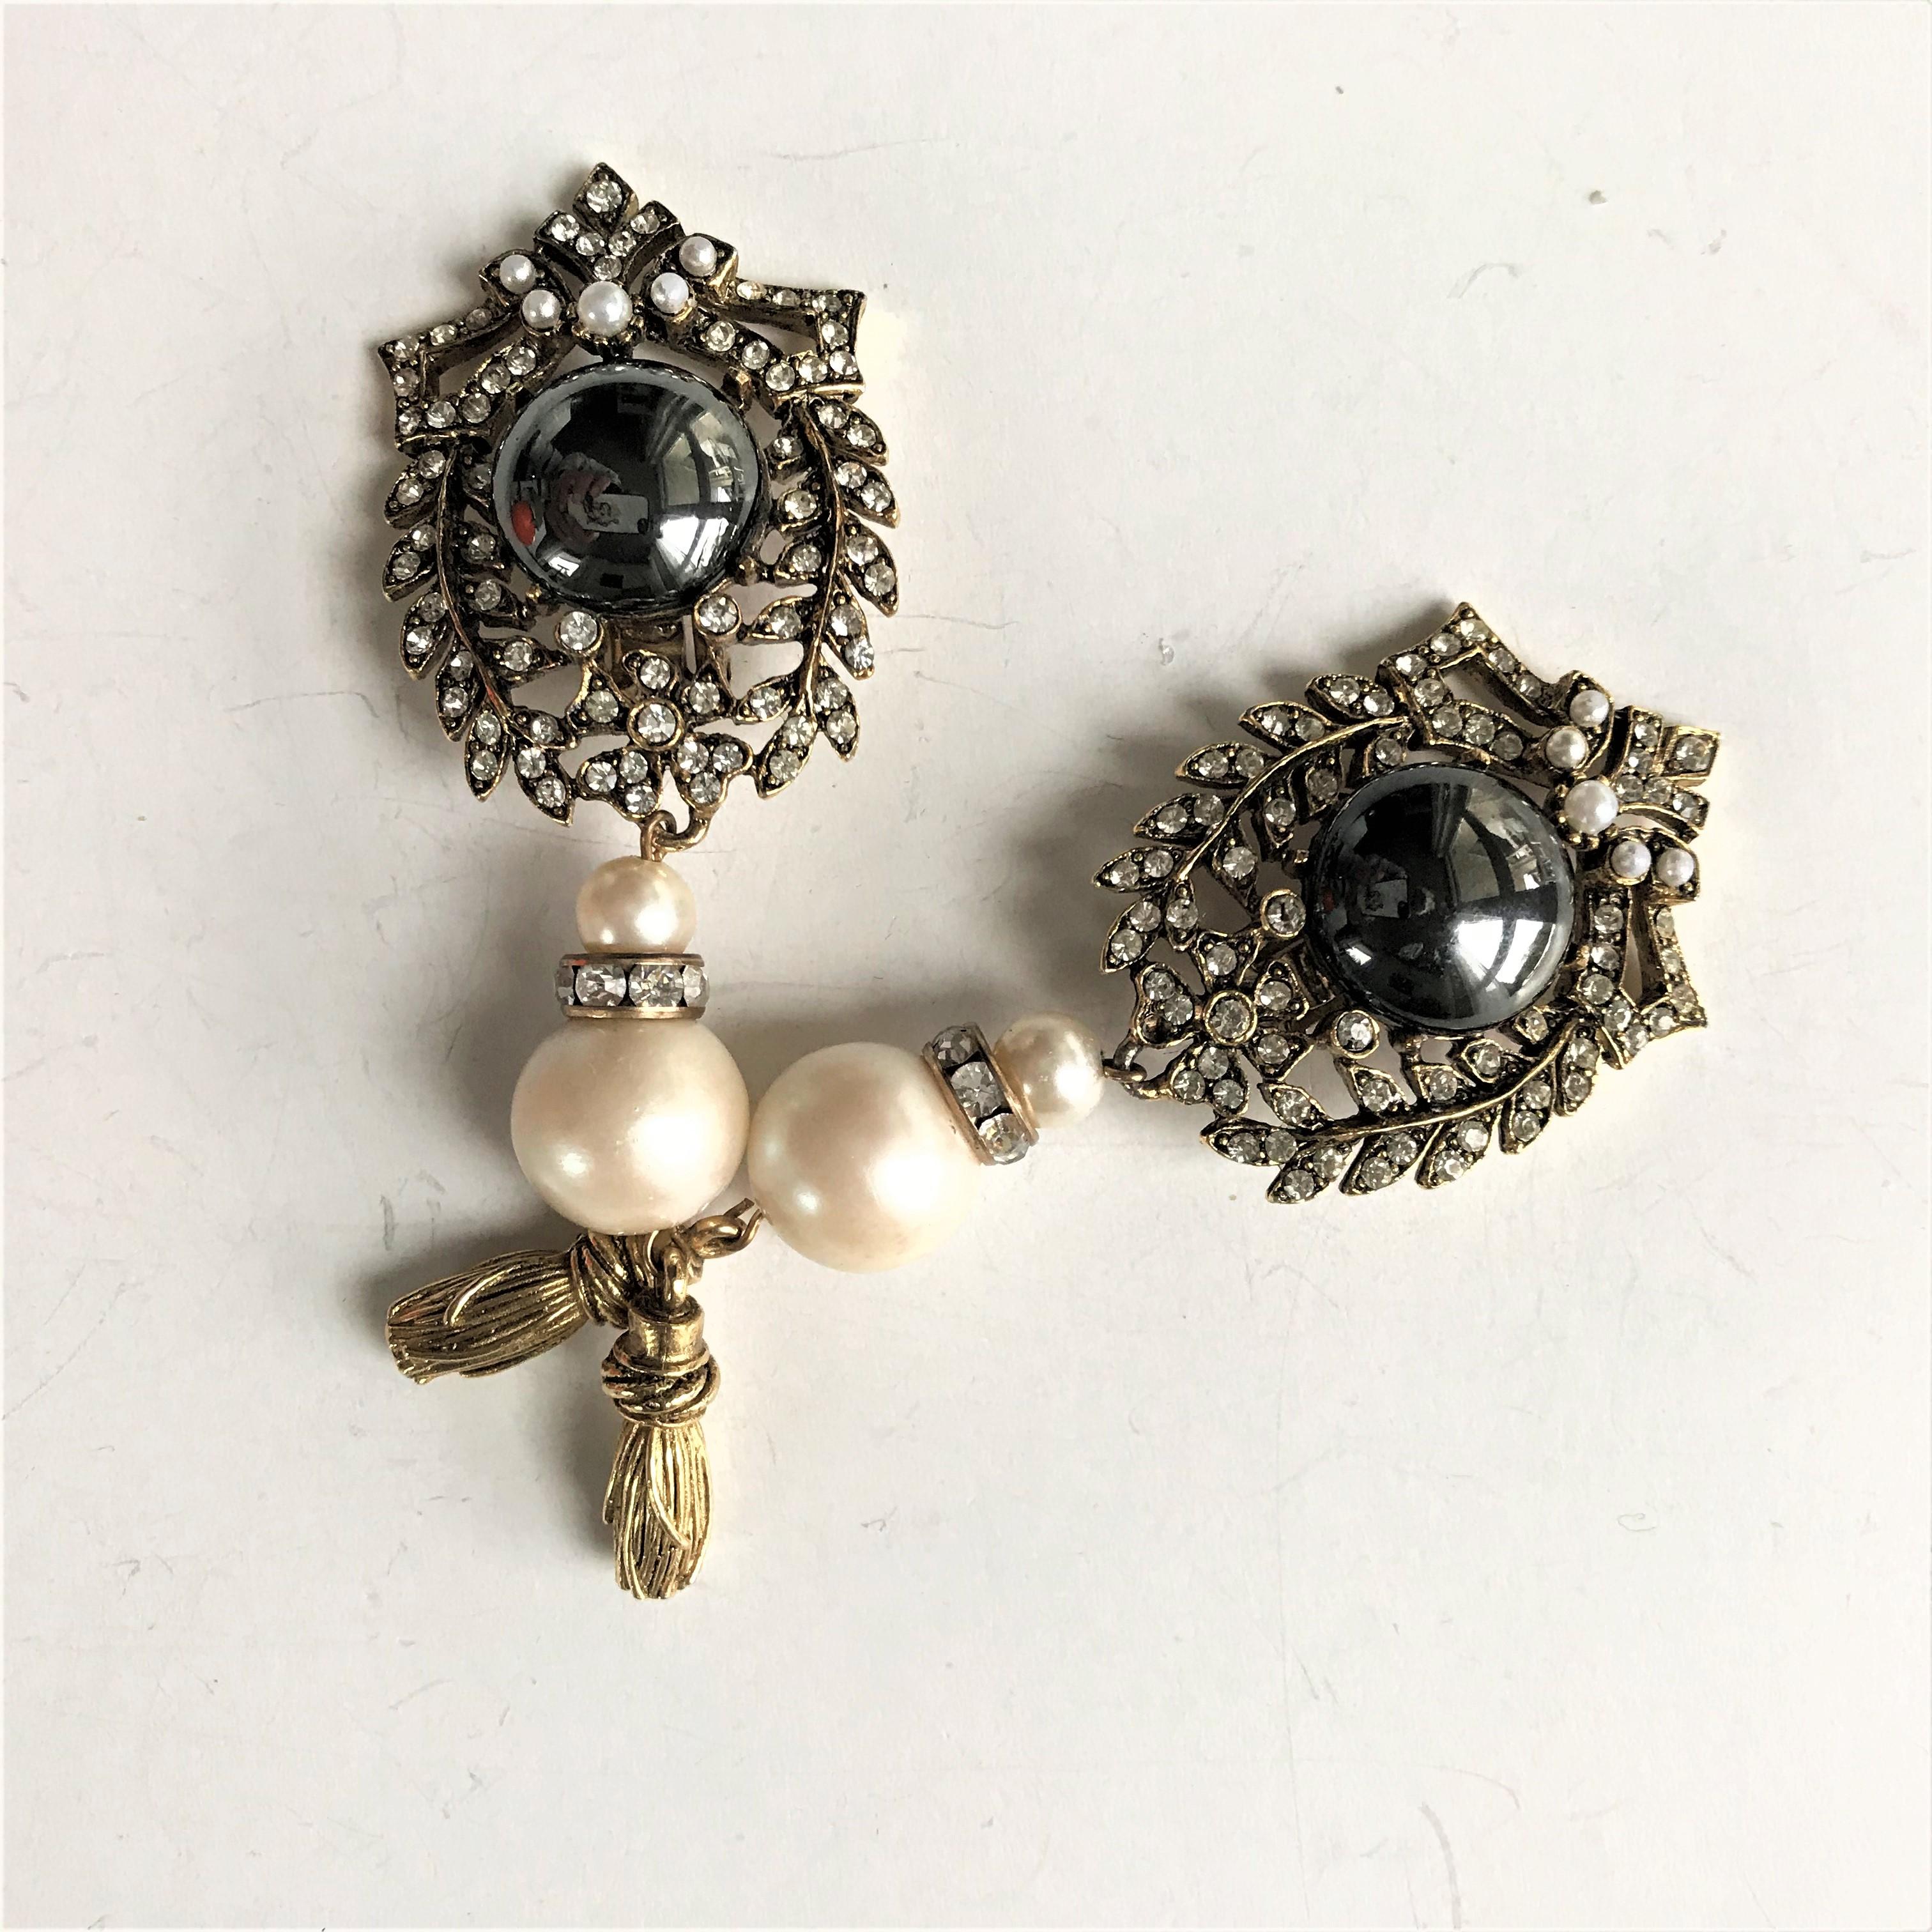 Pair of ear clip unsigned with a central shiny anthrazit stone, trimmed with fine leaf branches. Small rhinestones in the border. A false large pearl and a tassel are attached to it.

Dimensions length 10 cm, upper part 5 cm x 4 cm, attached large